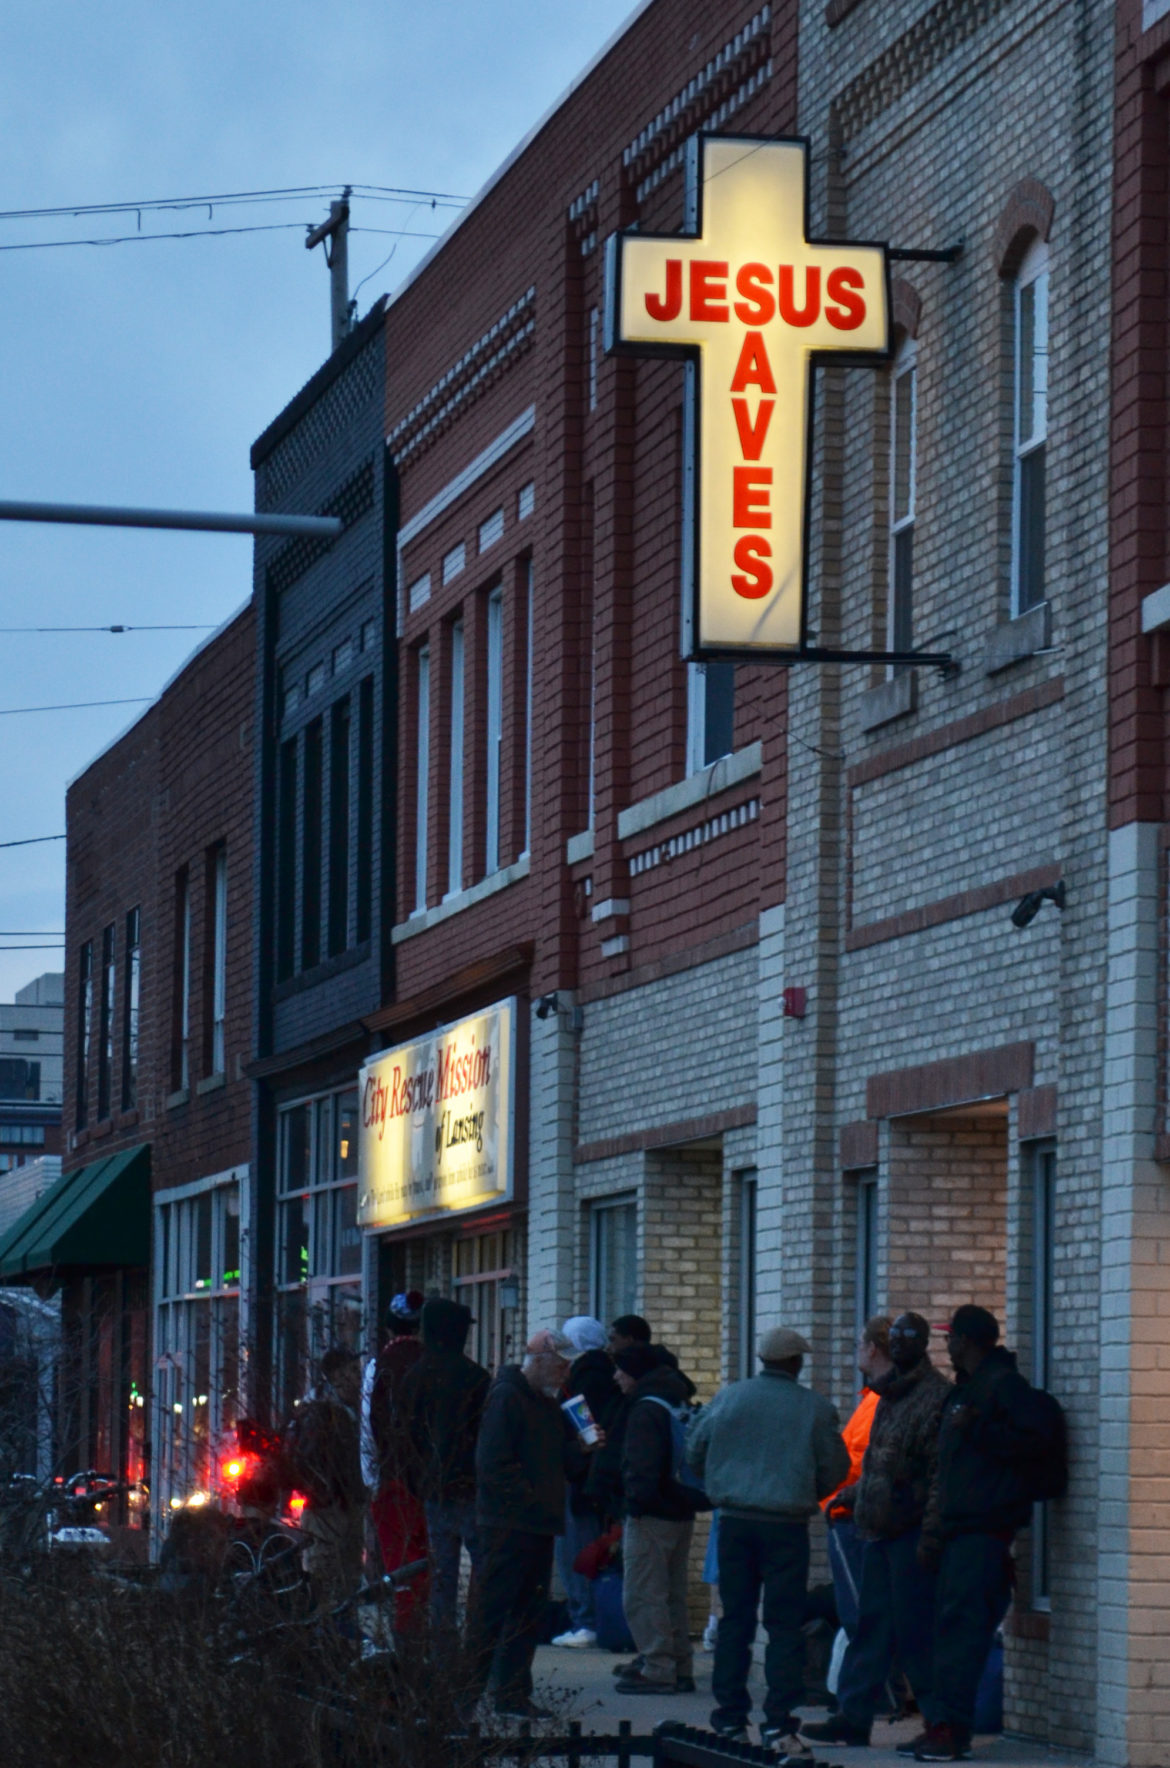 On Feb. 20 2017, a small group begins to gather outside of City Rescue Mission of Lansing.